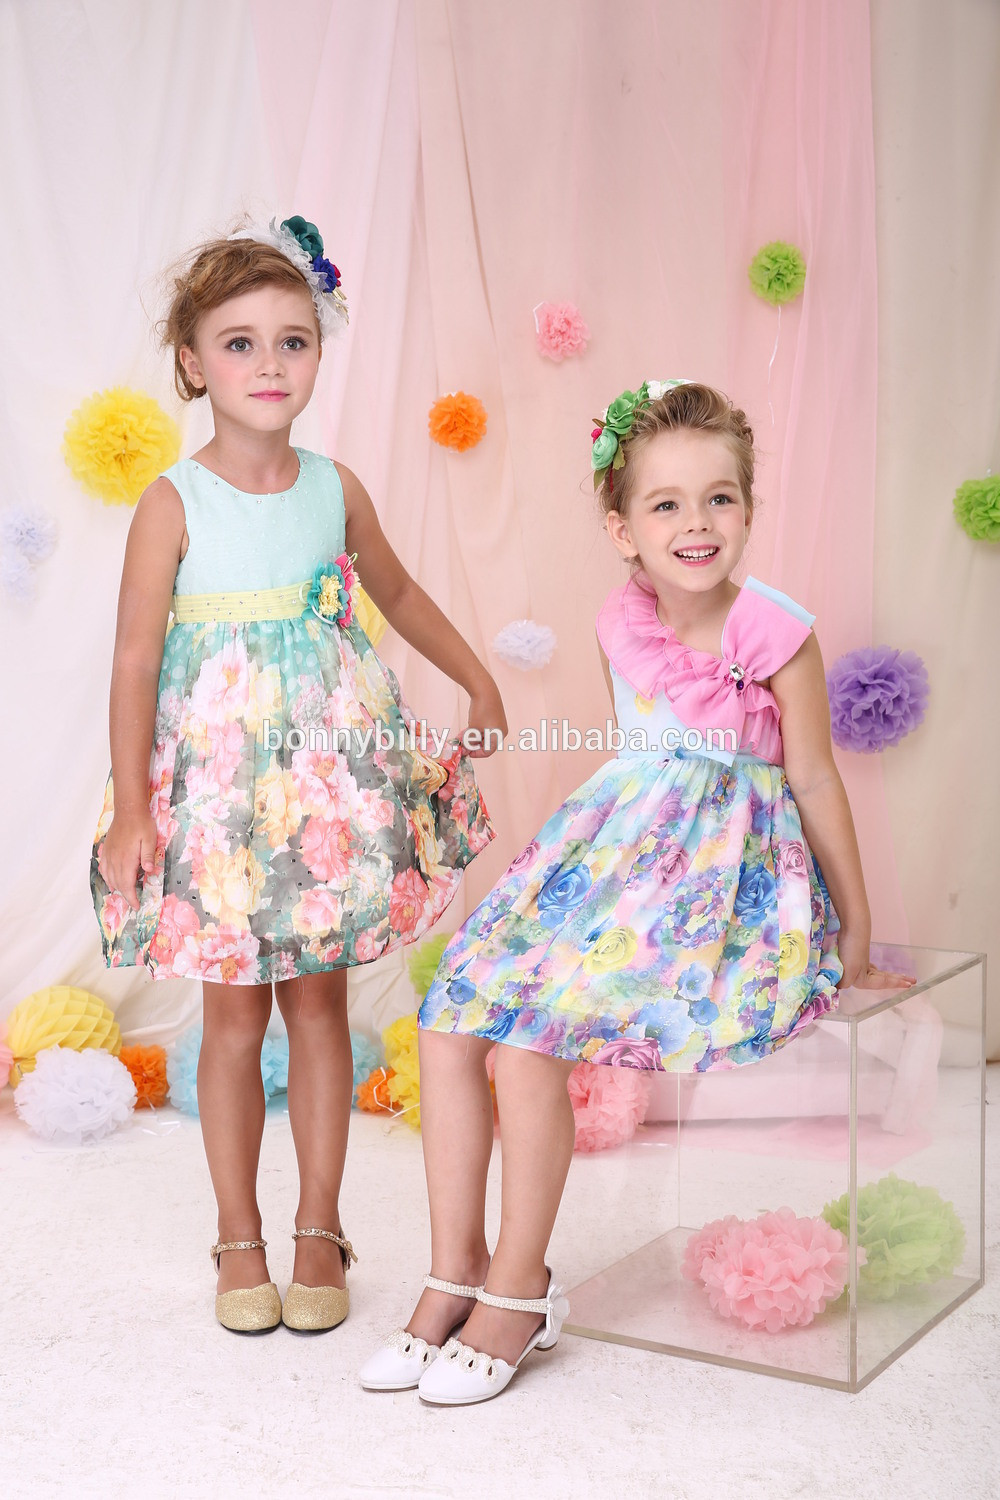 Wholesale Kids Fashion
 Children Clothing Thailand Kids Clothing Wholesale From